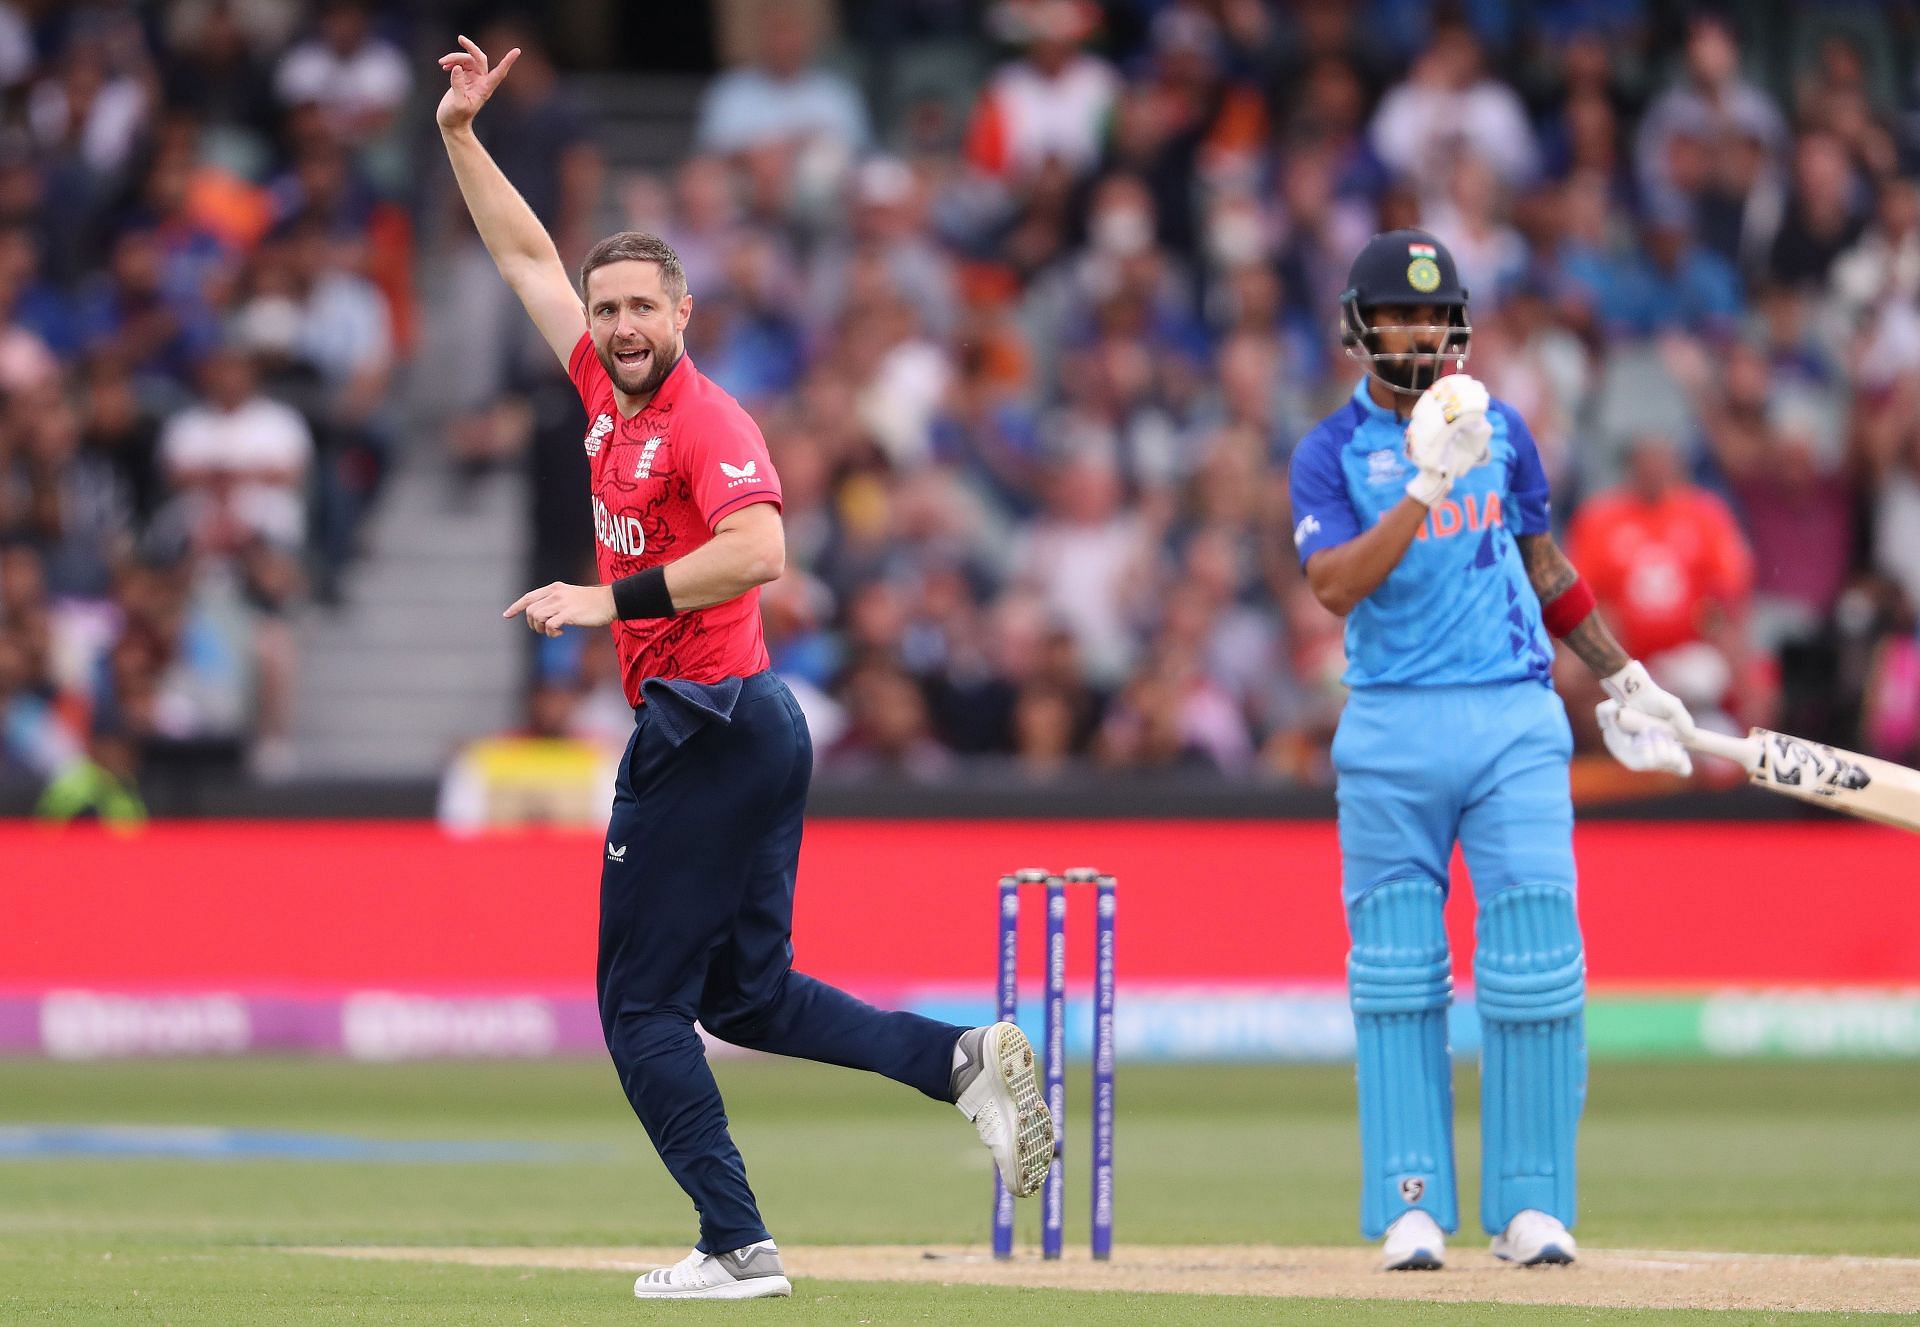 KL Rahul was caught behind off Chris Woakes&#039; bowling in Thursday&#039;s game.